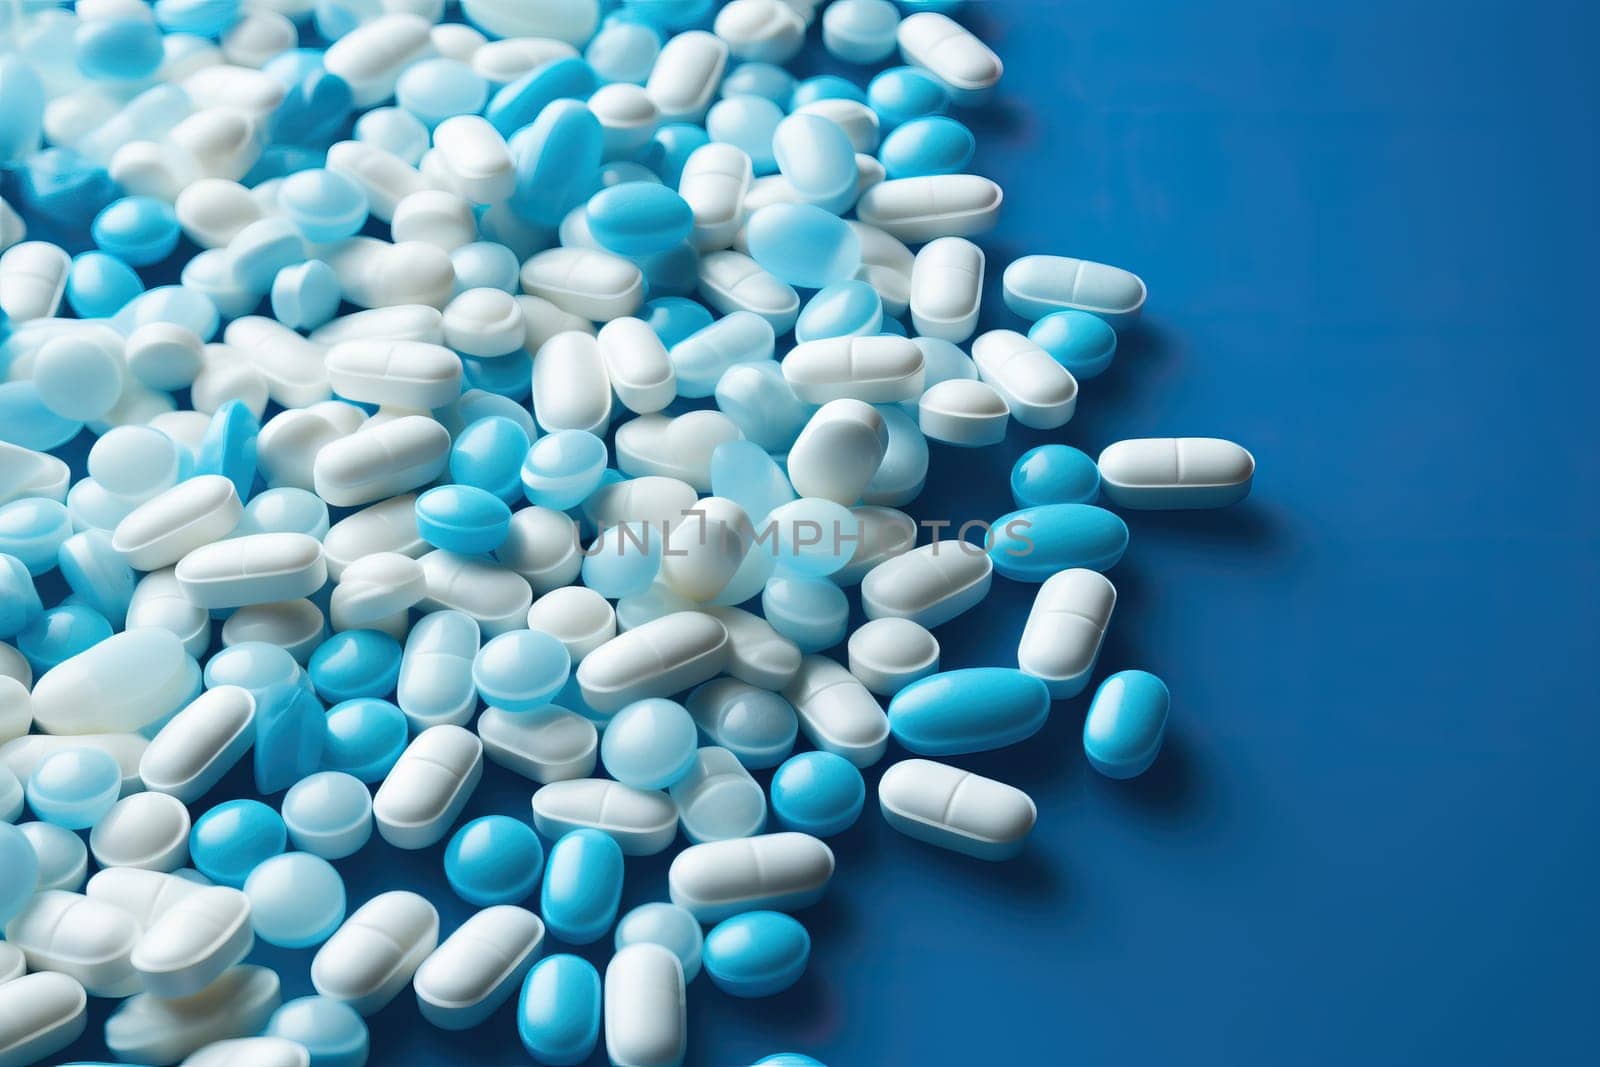 Scattered White and Blue Pills on Blue Surface